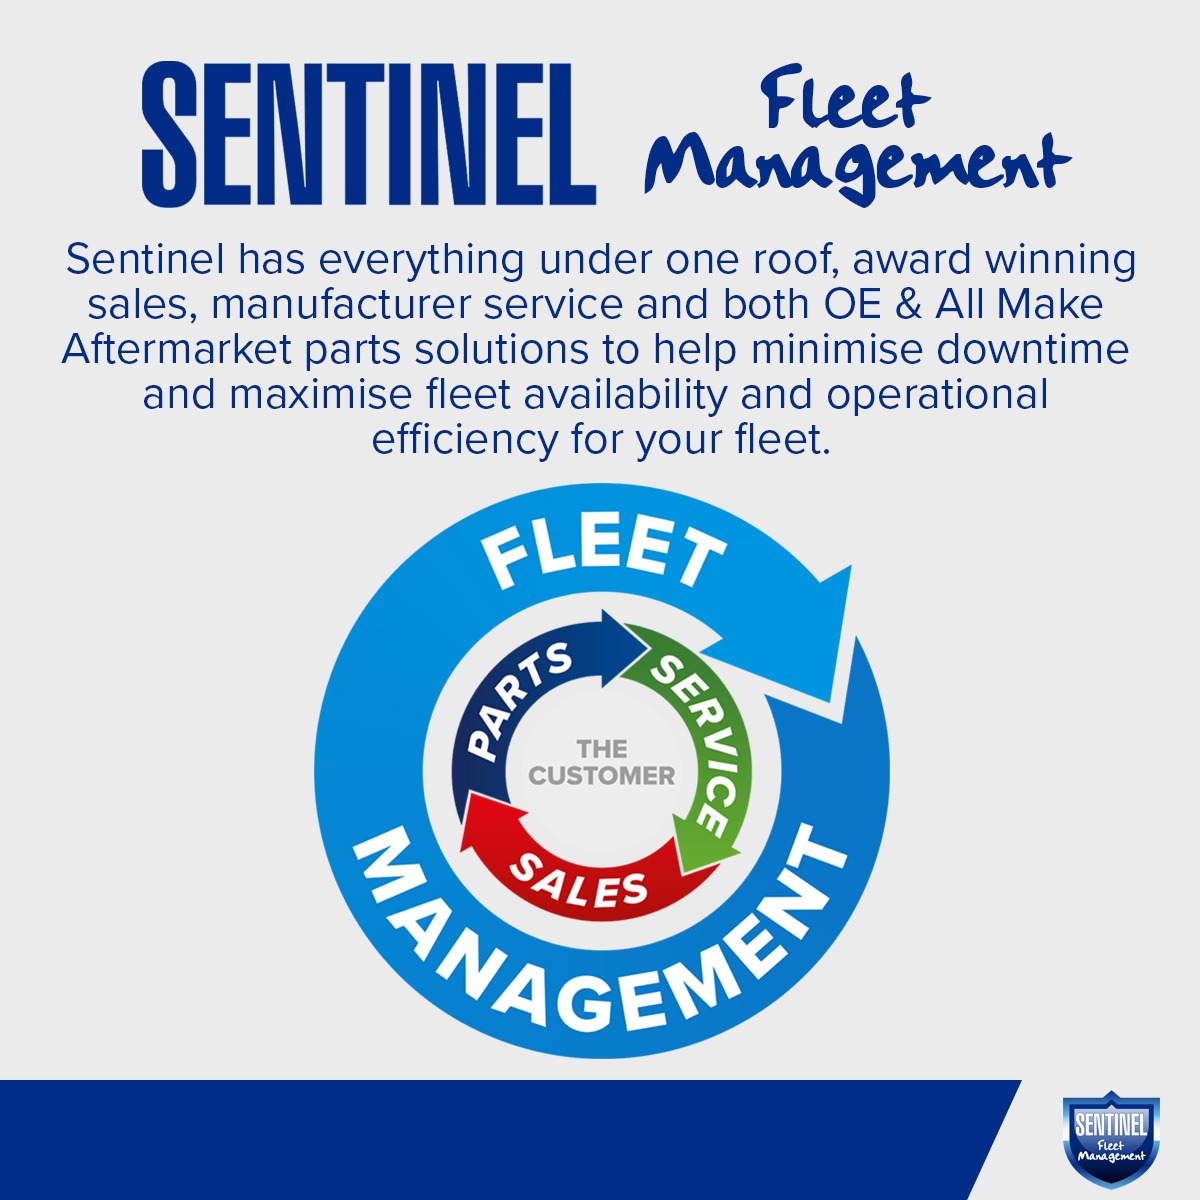 Sentinel is always on hand to offer you the support you may need.
Visit our website sentinelfleet.co.uk to find out more.

#sentinel #fleet #management #fleetmanagement #automotive #commercialvehicles #commercialvehicle #vehicles #bespoke #24HourService #repair